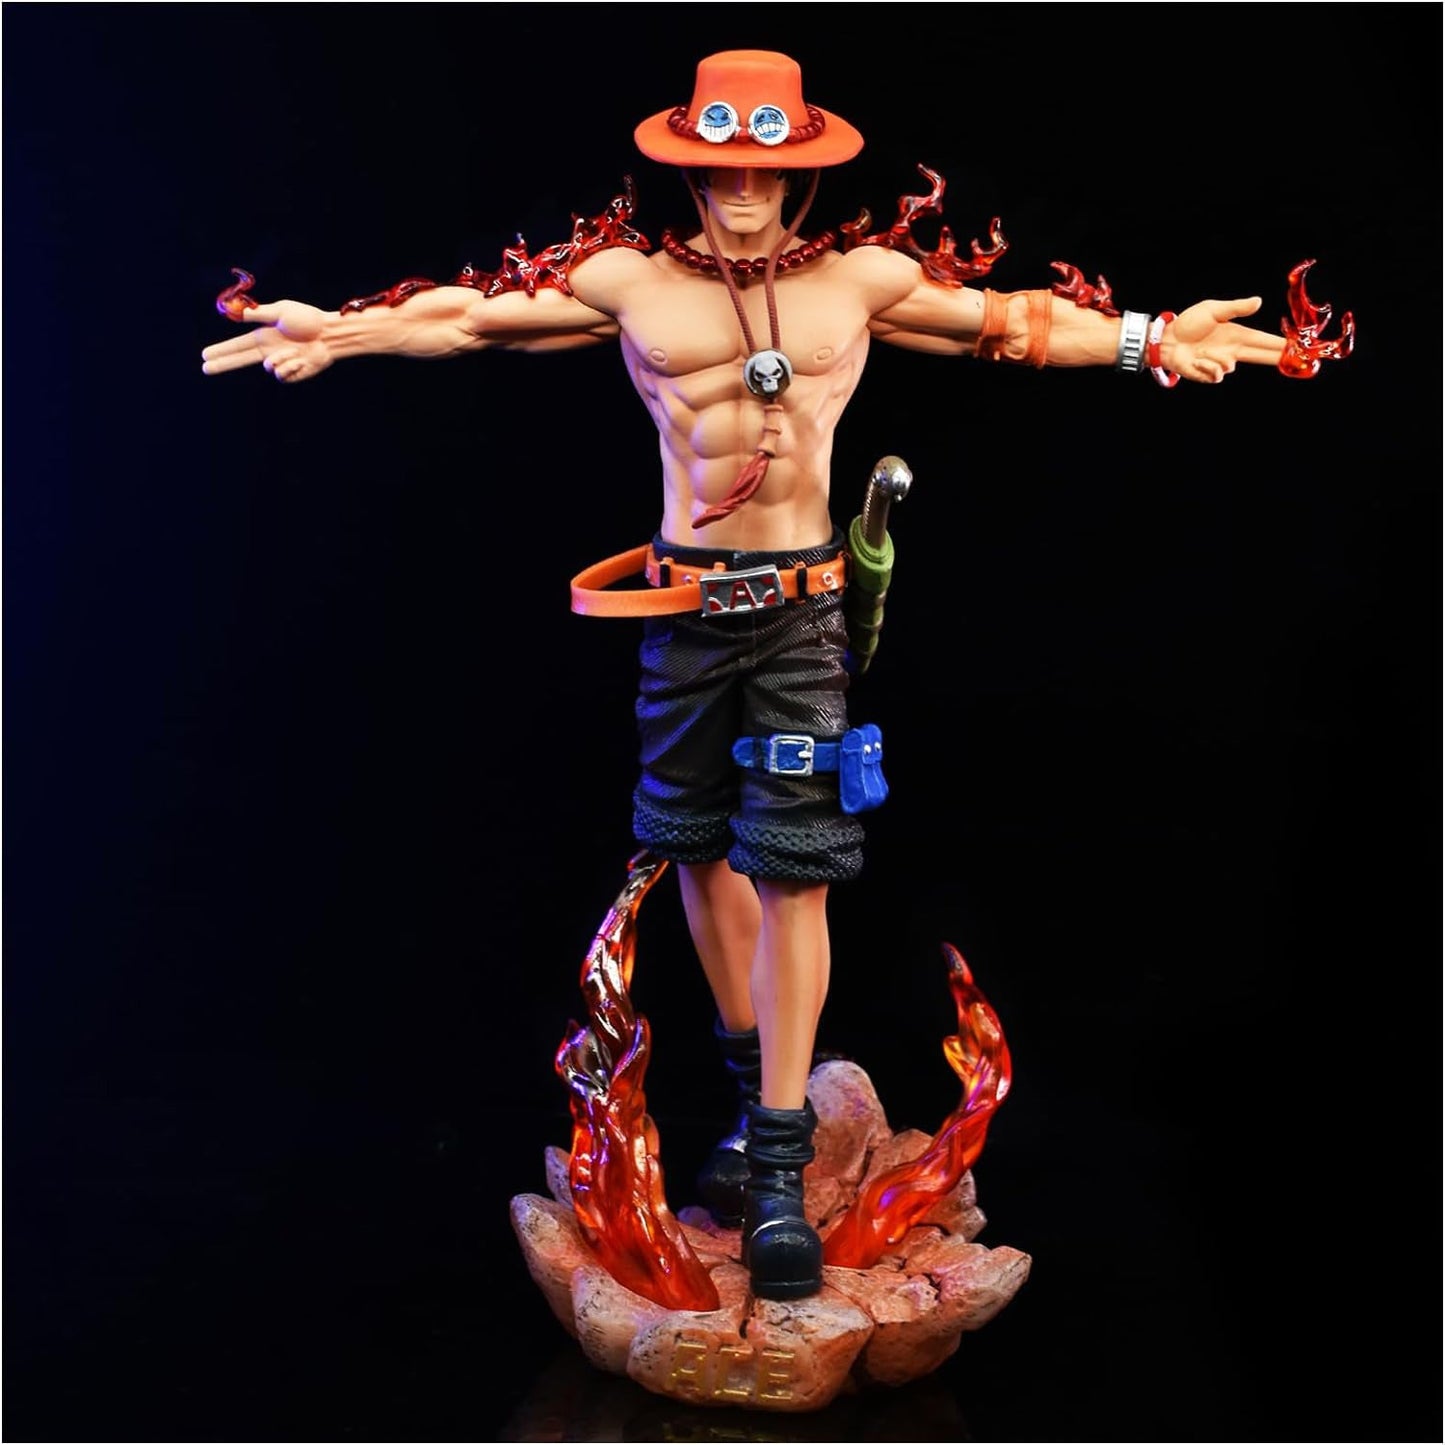 LX Ace Anime Action Figure Decoration Statue Model Toy Gift